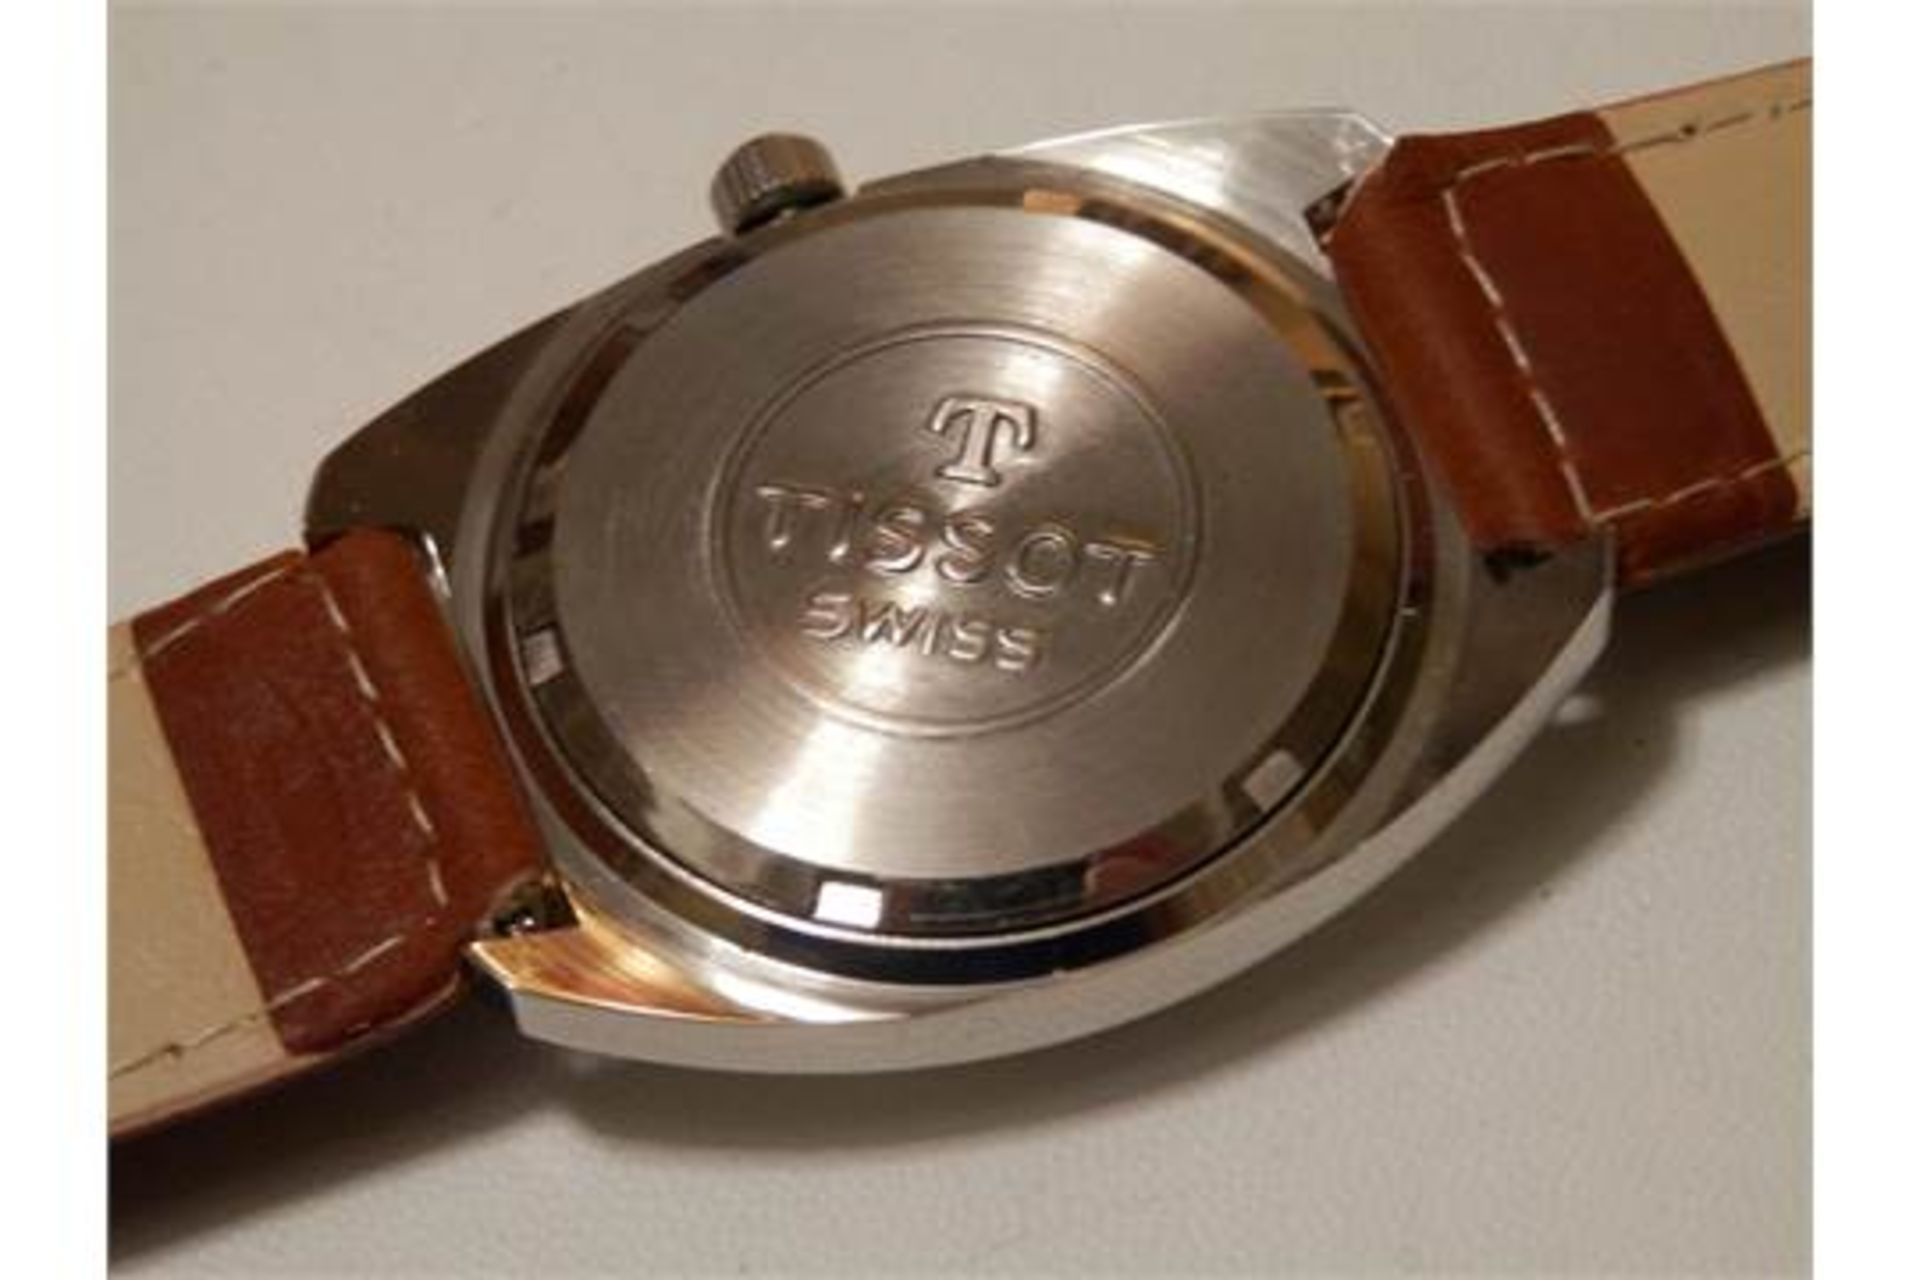 SUPERB GENTS TISSOT SEASTAR, POSSIBLY NEW/OLD STOCK 1970S 17 JEWEL SWISS WATCH (#3 of 3 available) - Image 5 of 10